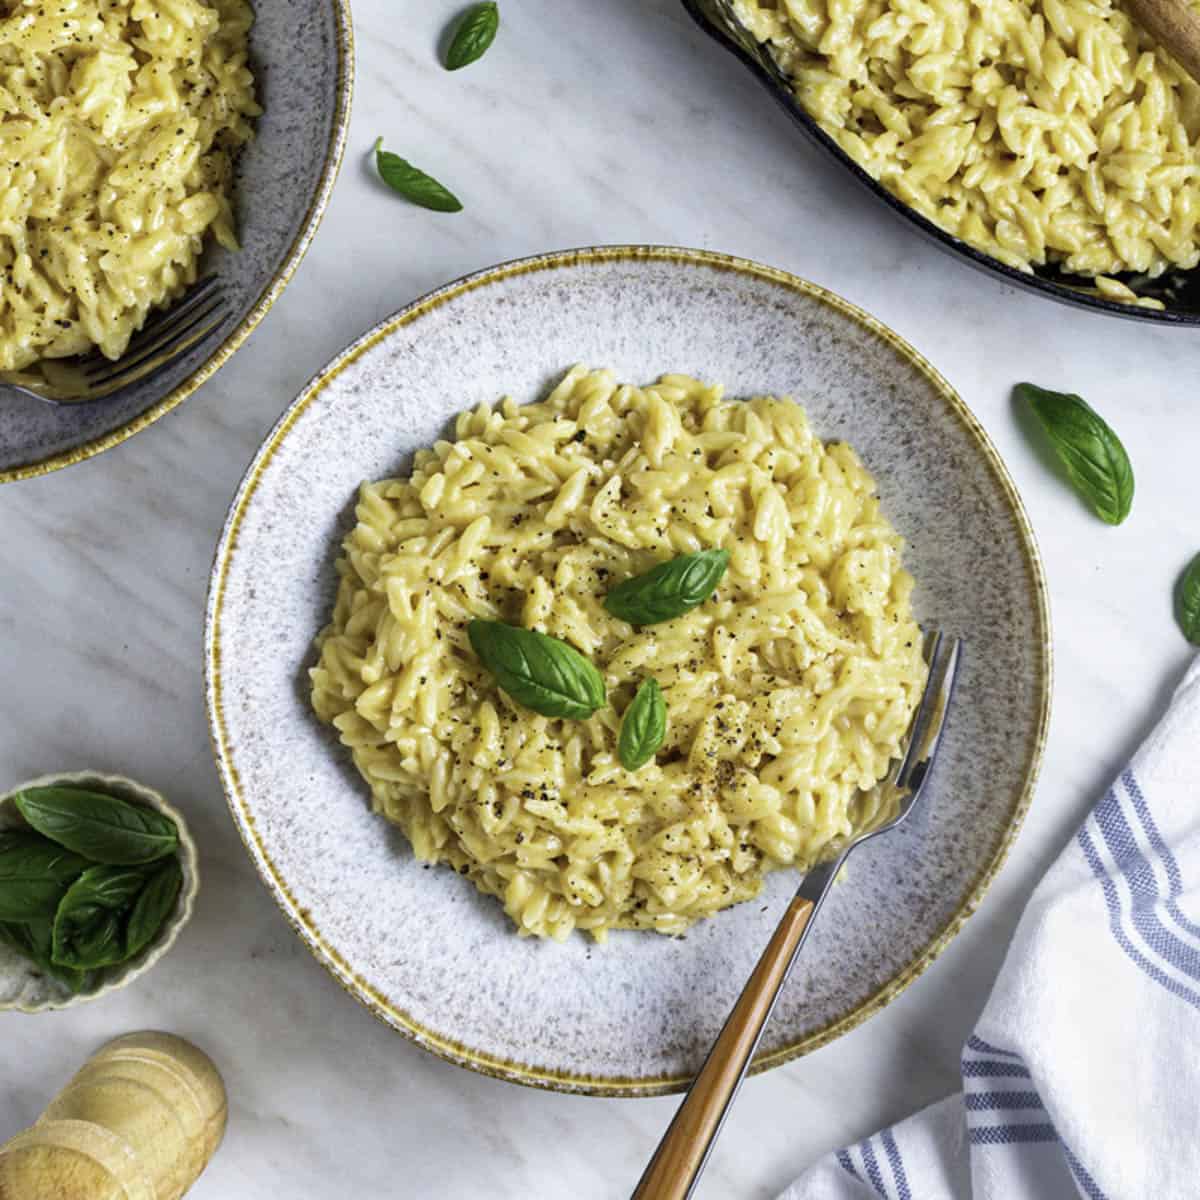 First of all I decides not use Patina pasta, I chose to use Orzo pasta because it a tougher type of pasta with more body, When I looked at the patina it seems to get lost in the dish but the Orzo is courser and firmer and handle this dish very well